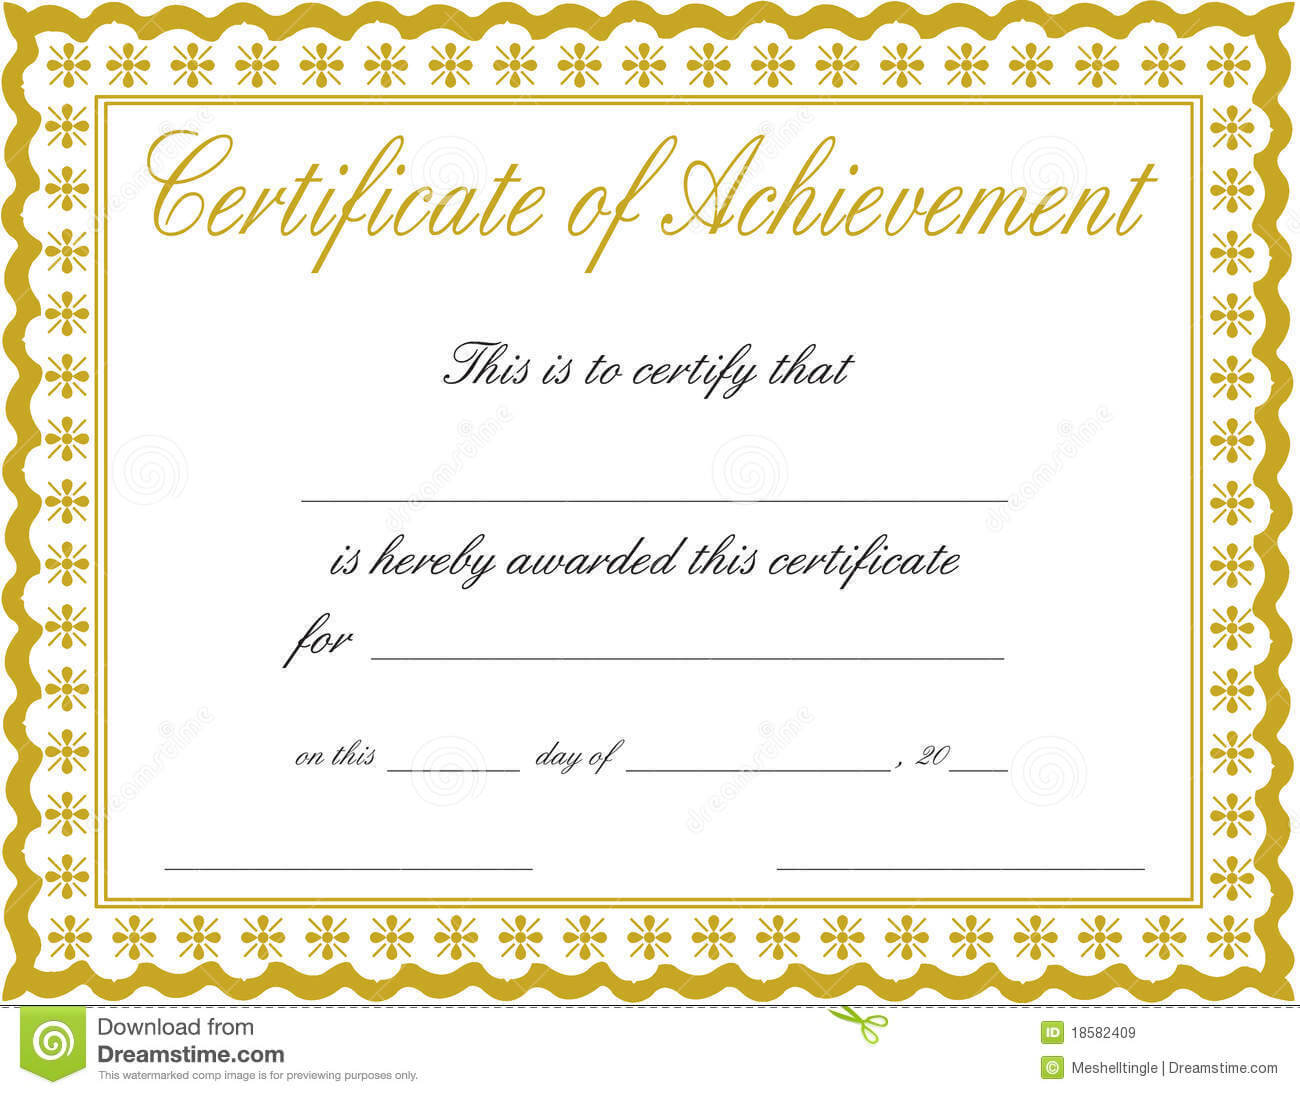 Free Printable Certificate Of Achievement Template | Mult Pertaining To Free Printable Certificate Of Achievement Template